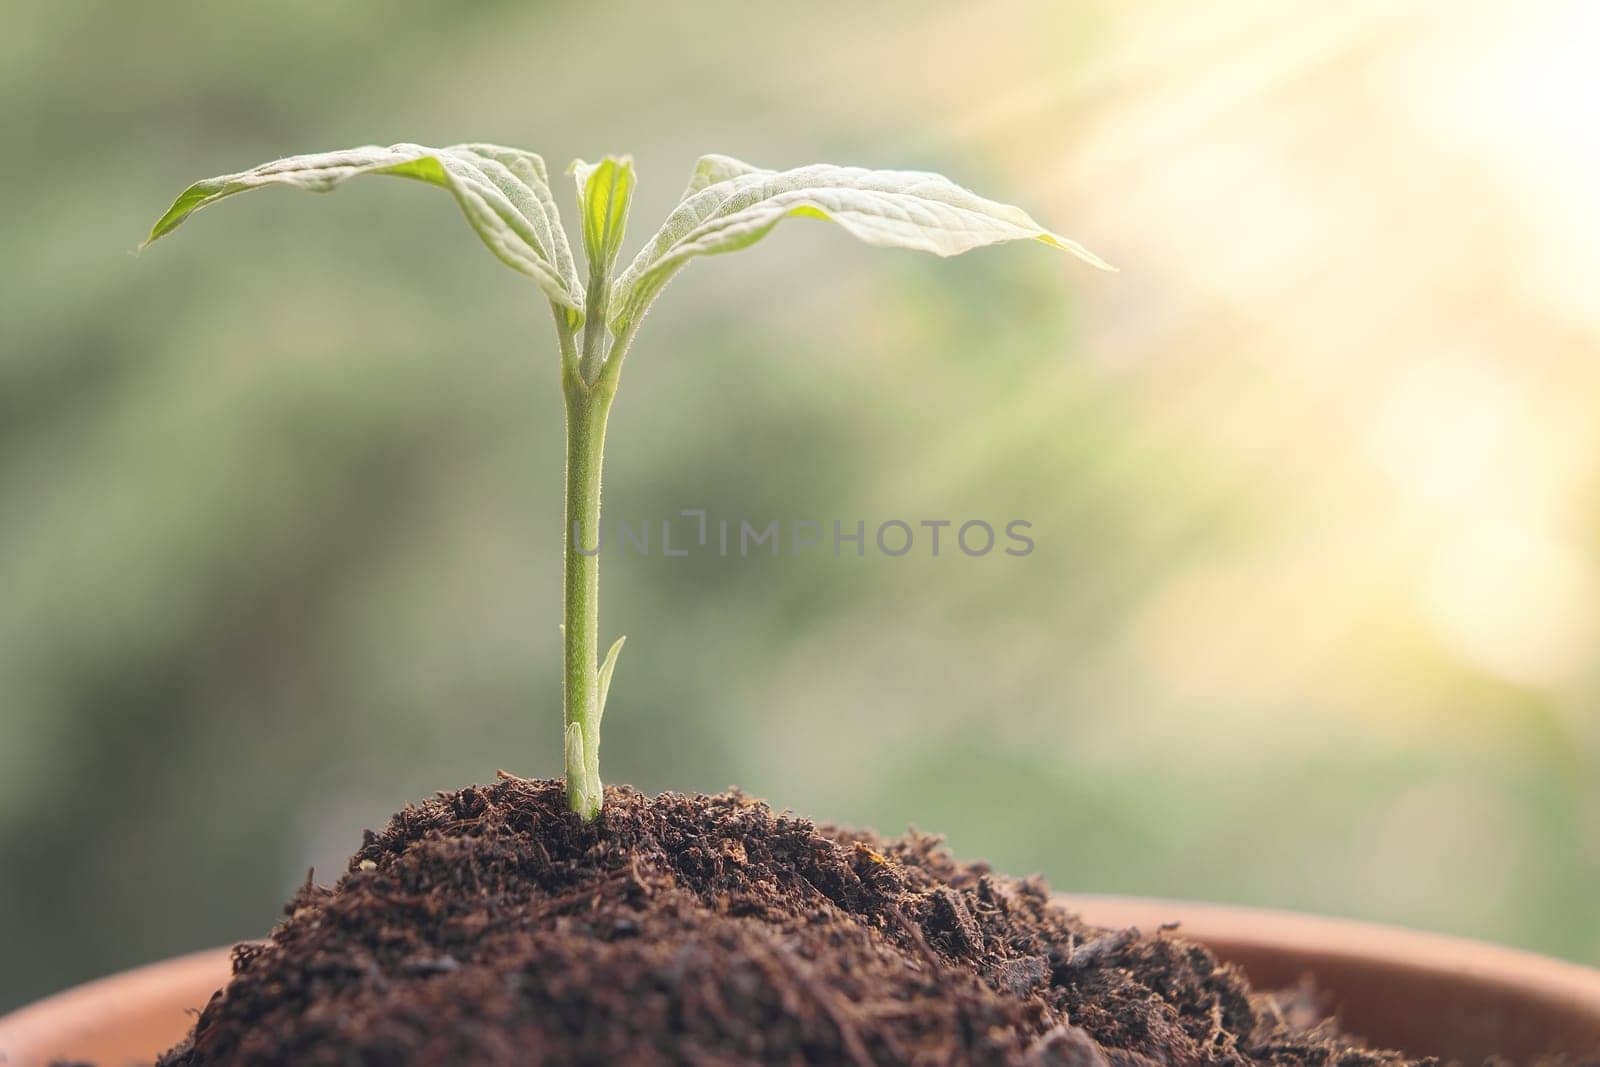 The seedling are growing from the rich soil in sunlight, ecology concept.